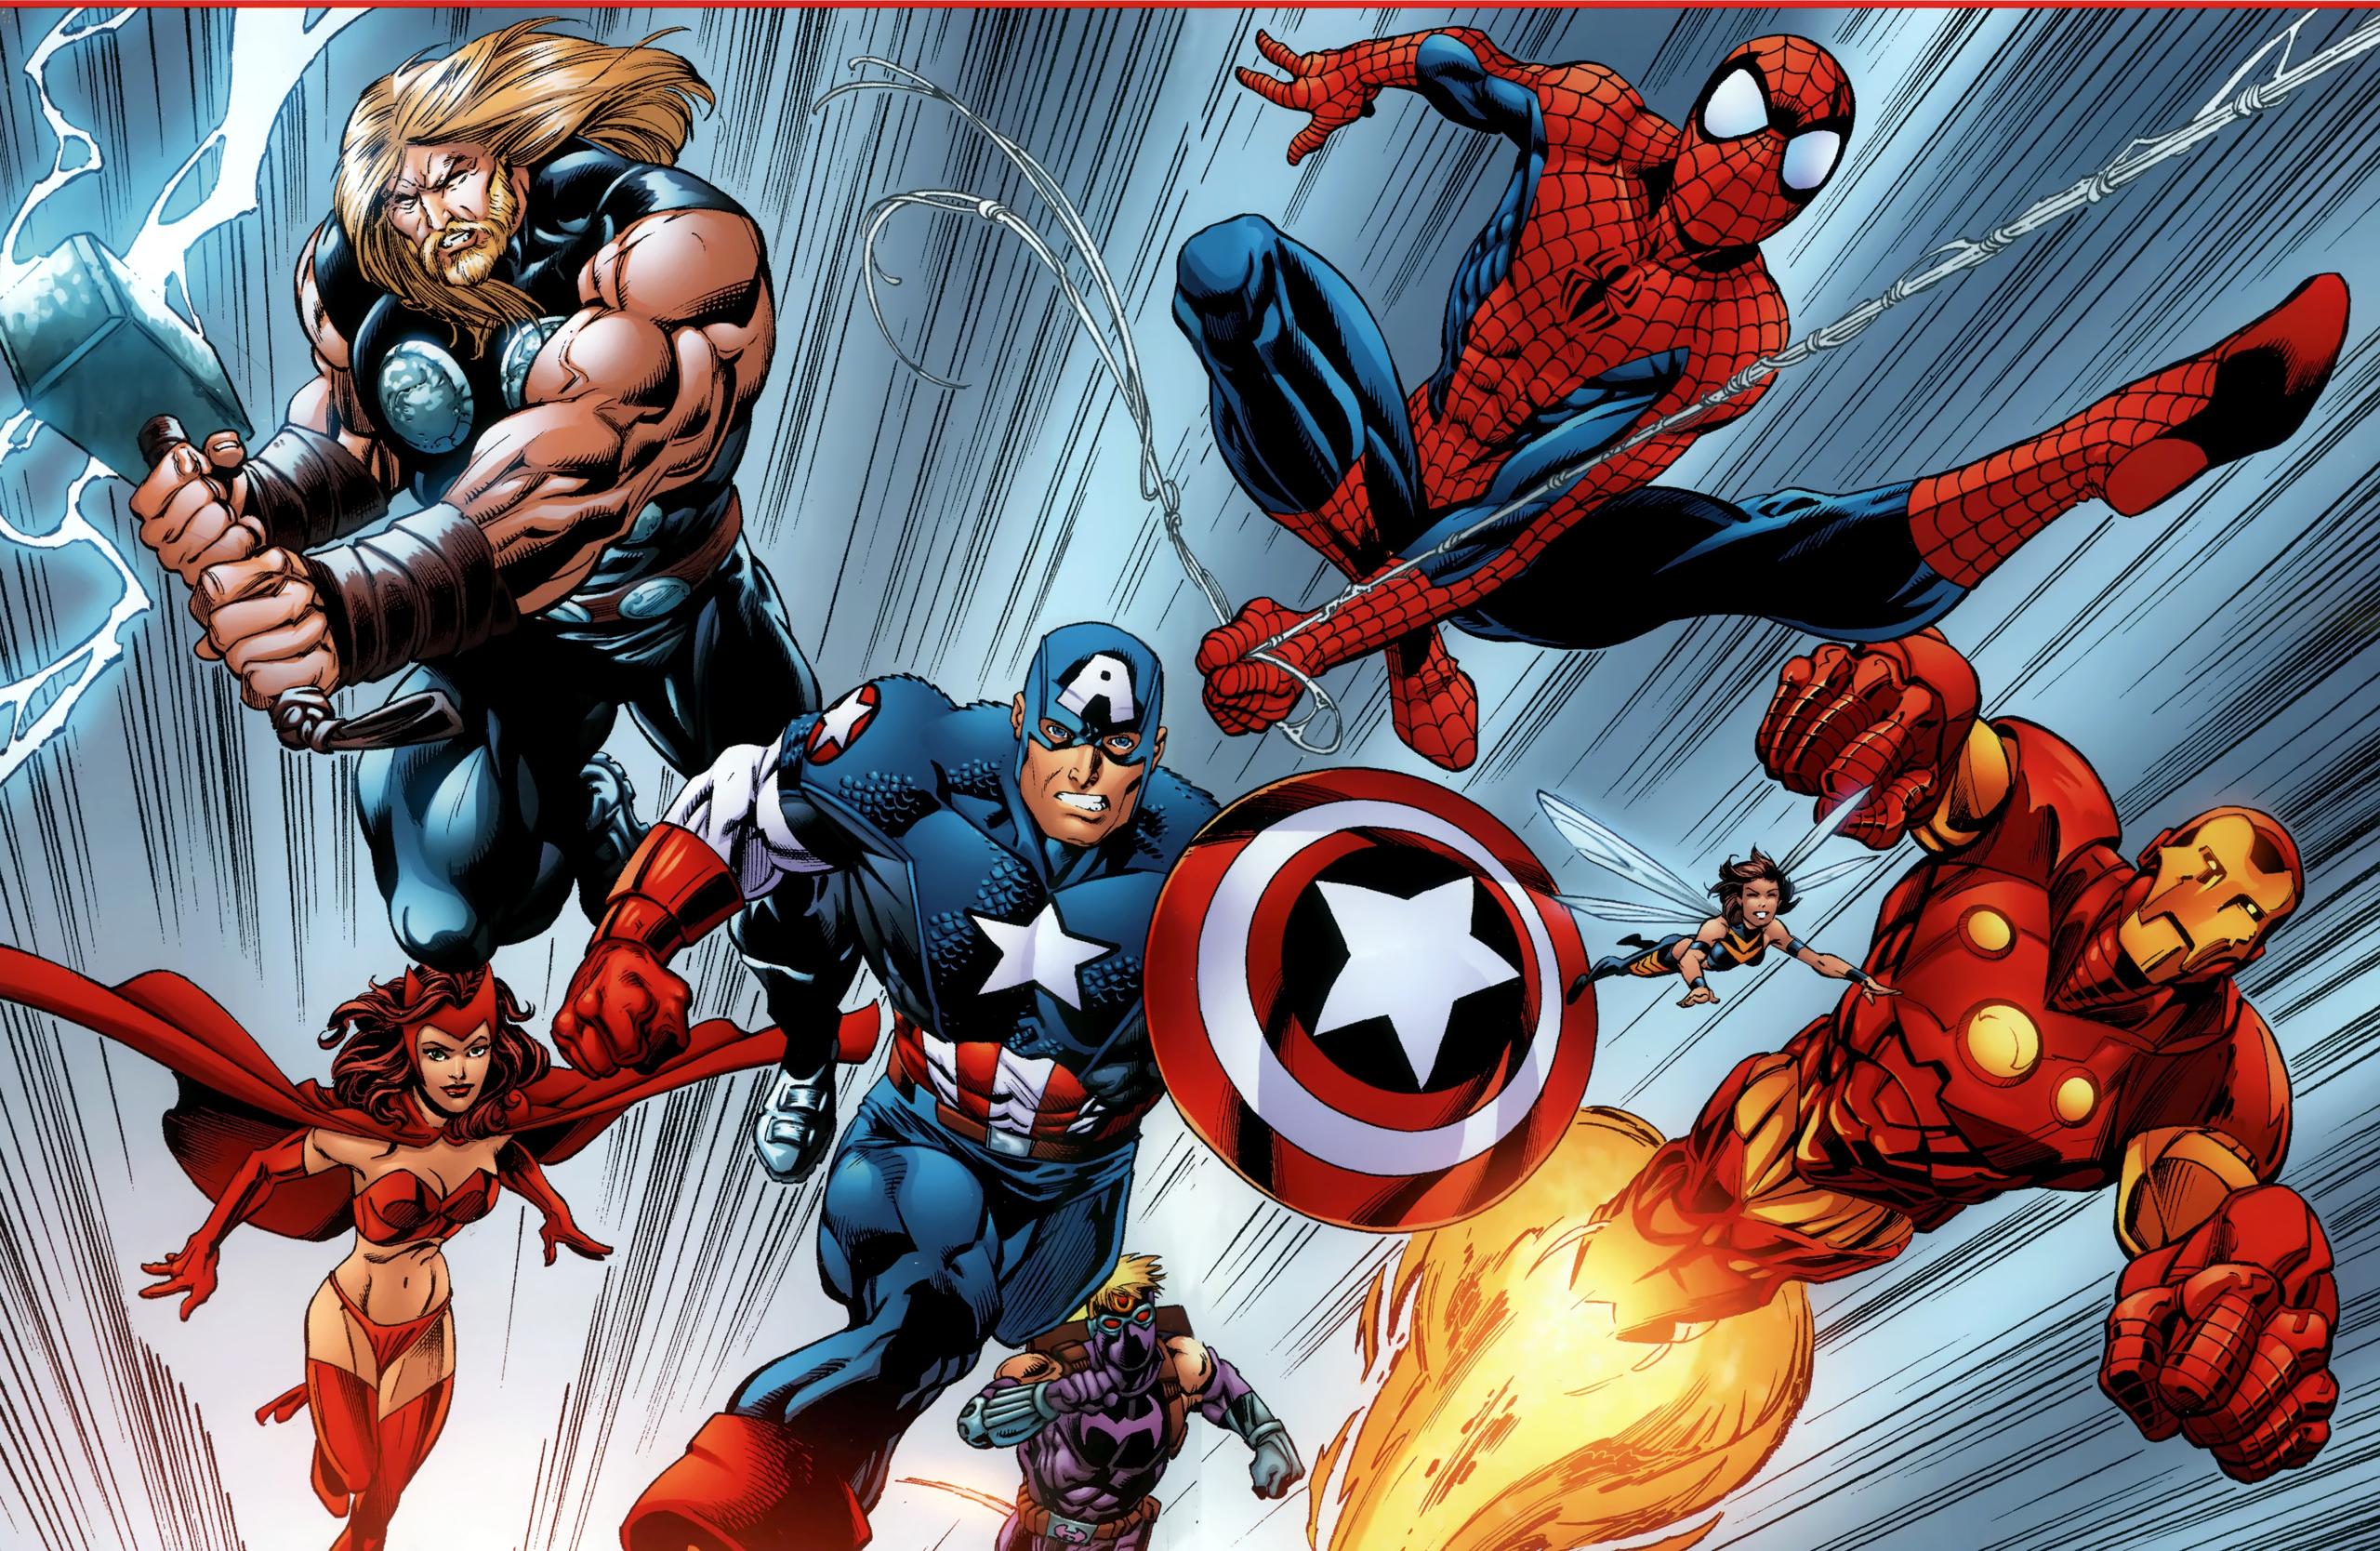 Is Spider-Man going back to Marvel a bad thing?